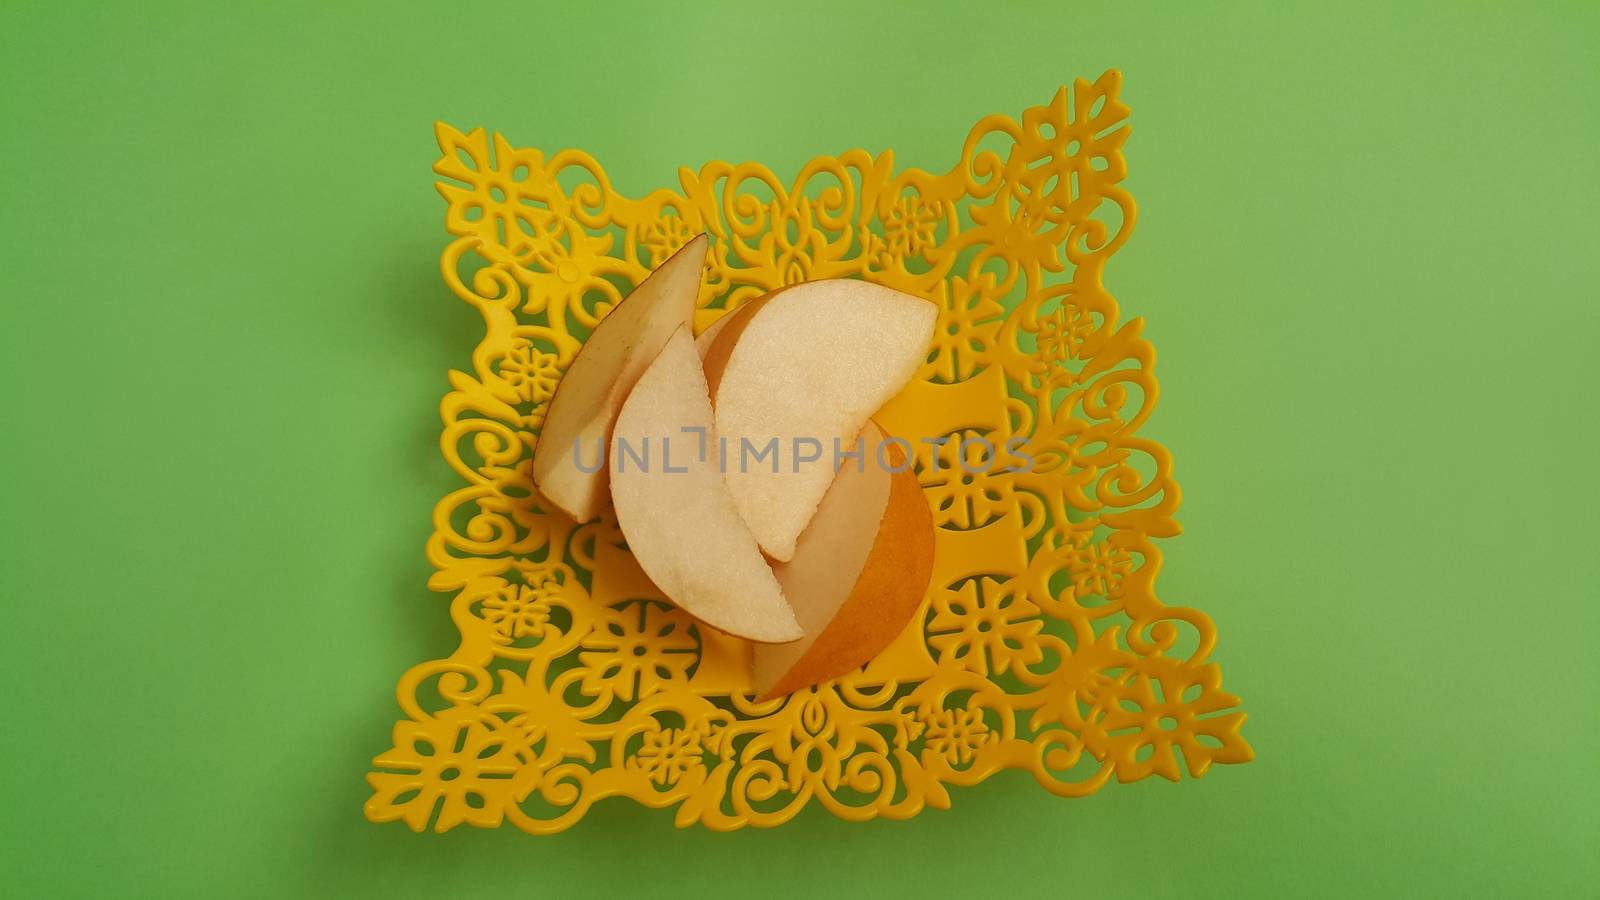 Close up view of apple slices placed in plastic yellow changair or container on a wooden floor. Fruit background for text